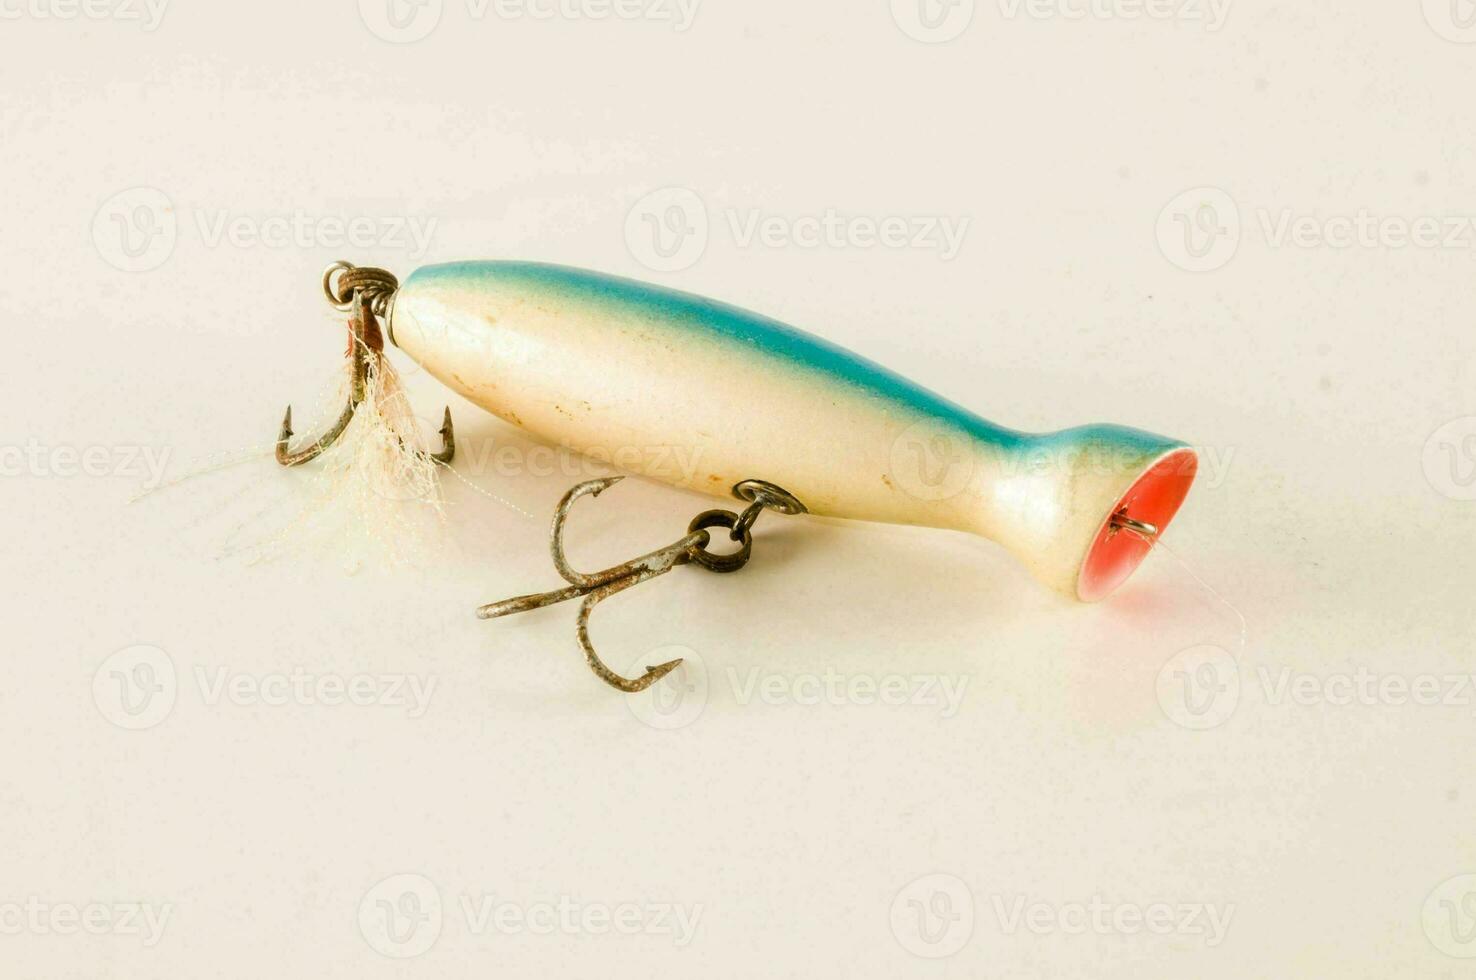 a small fishing lure with a hook on it photo